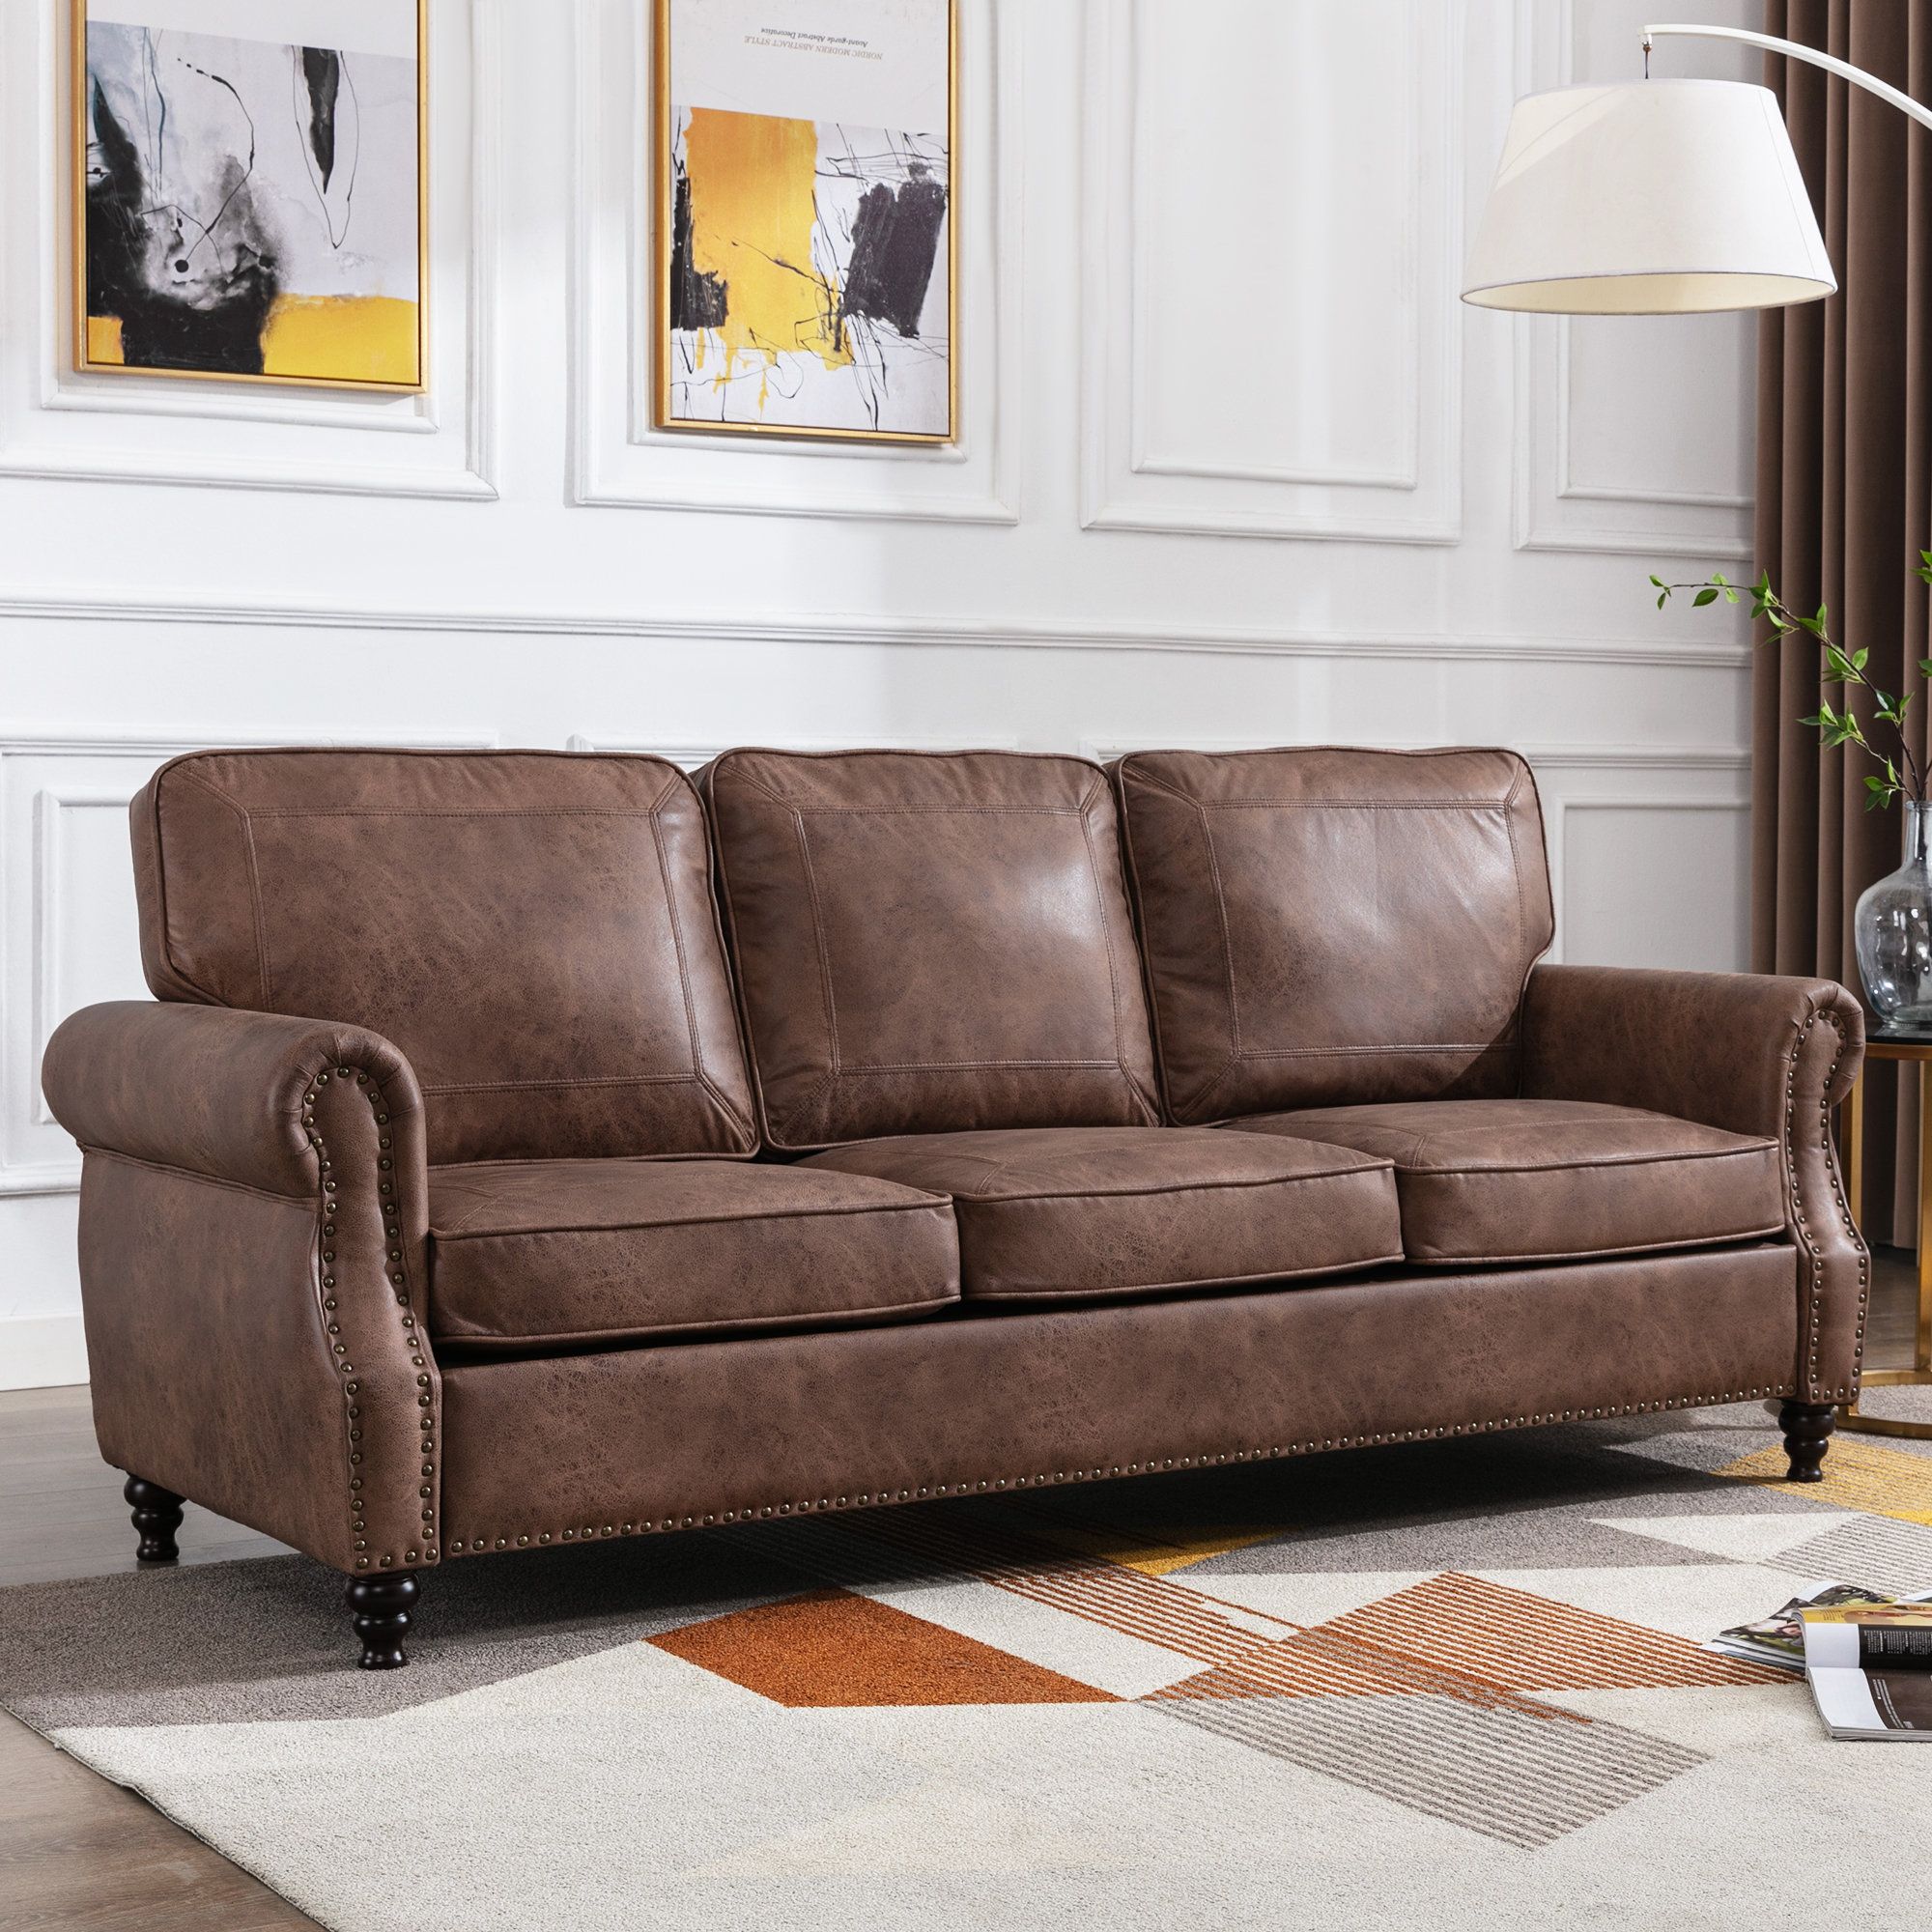 Lark Manor Amarius 80" Wide Faux Leather Rolled Arm Sofa & Reviews | Wayfair Inside Faux Leather Sofas (View 3 of 15)